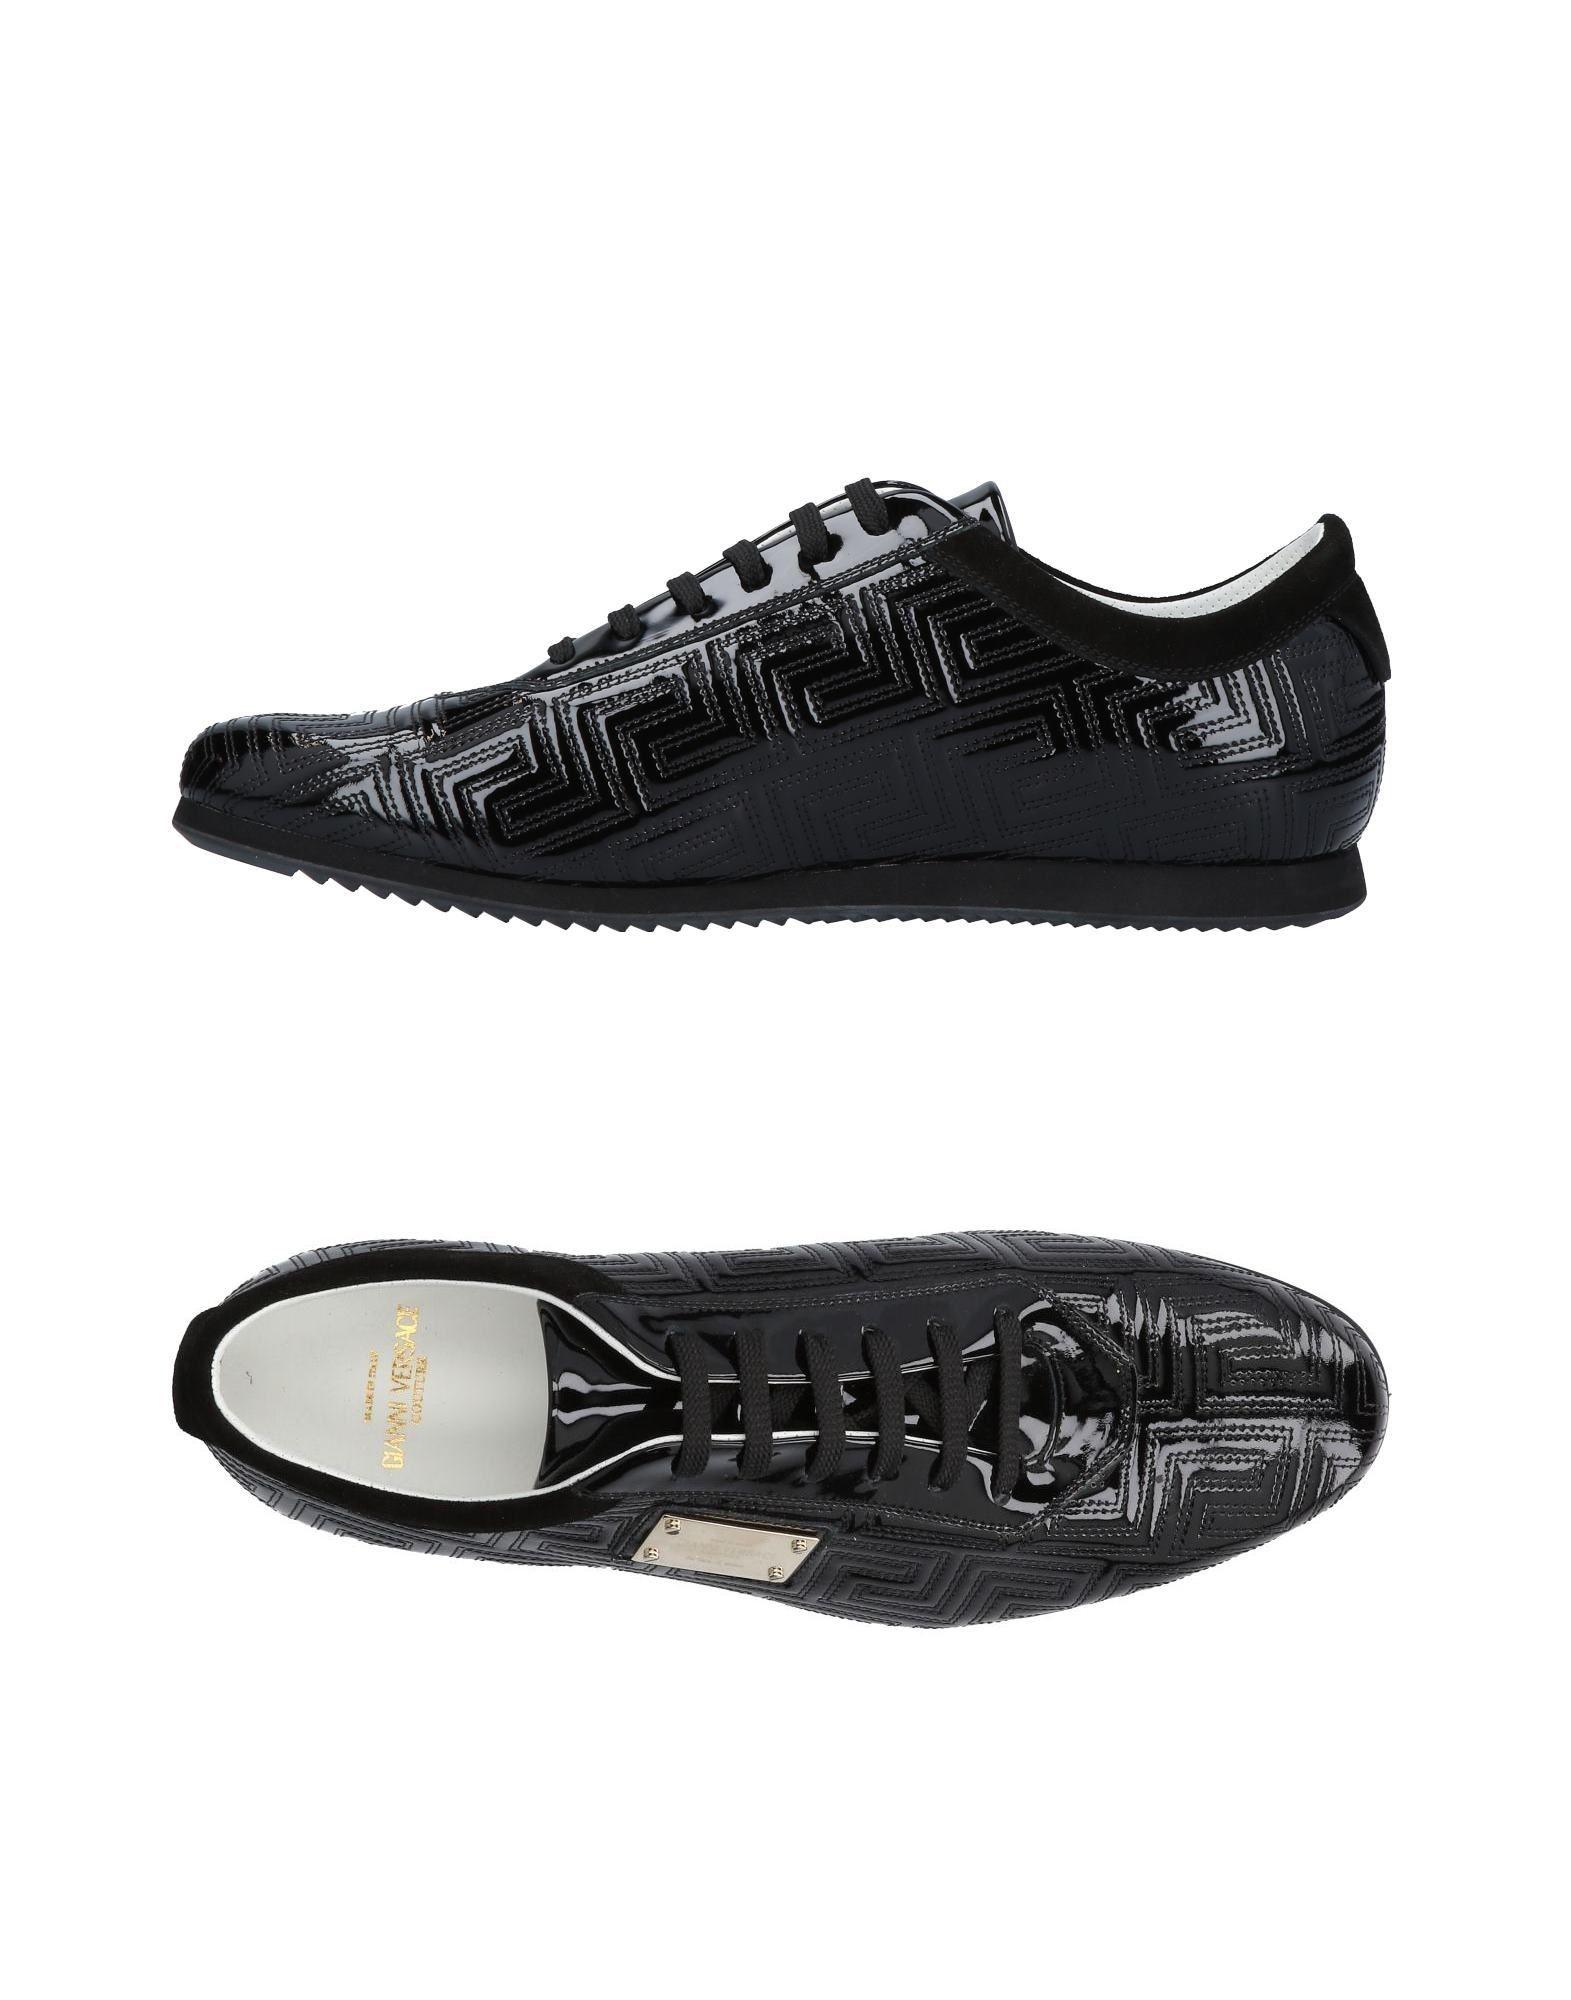 Gianni Versace Couture Leather Low-tops & Sneakers in Black for Men - Lyst